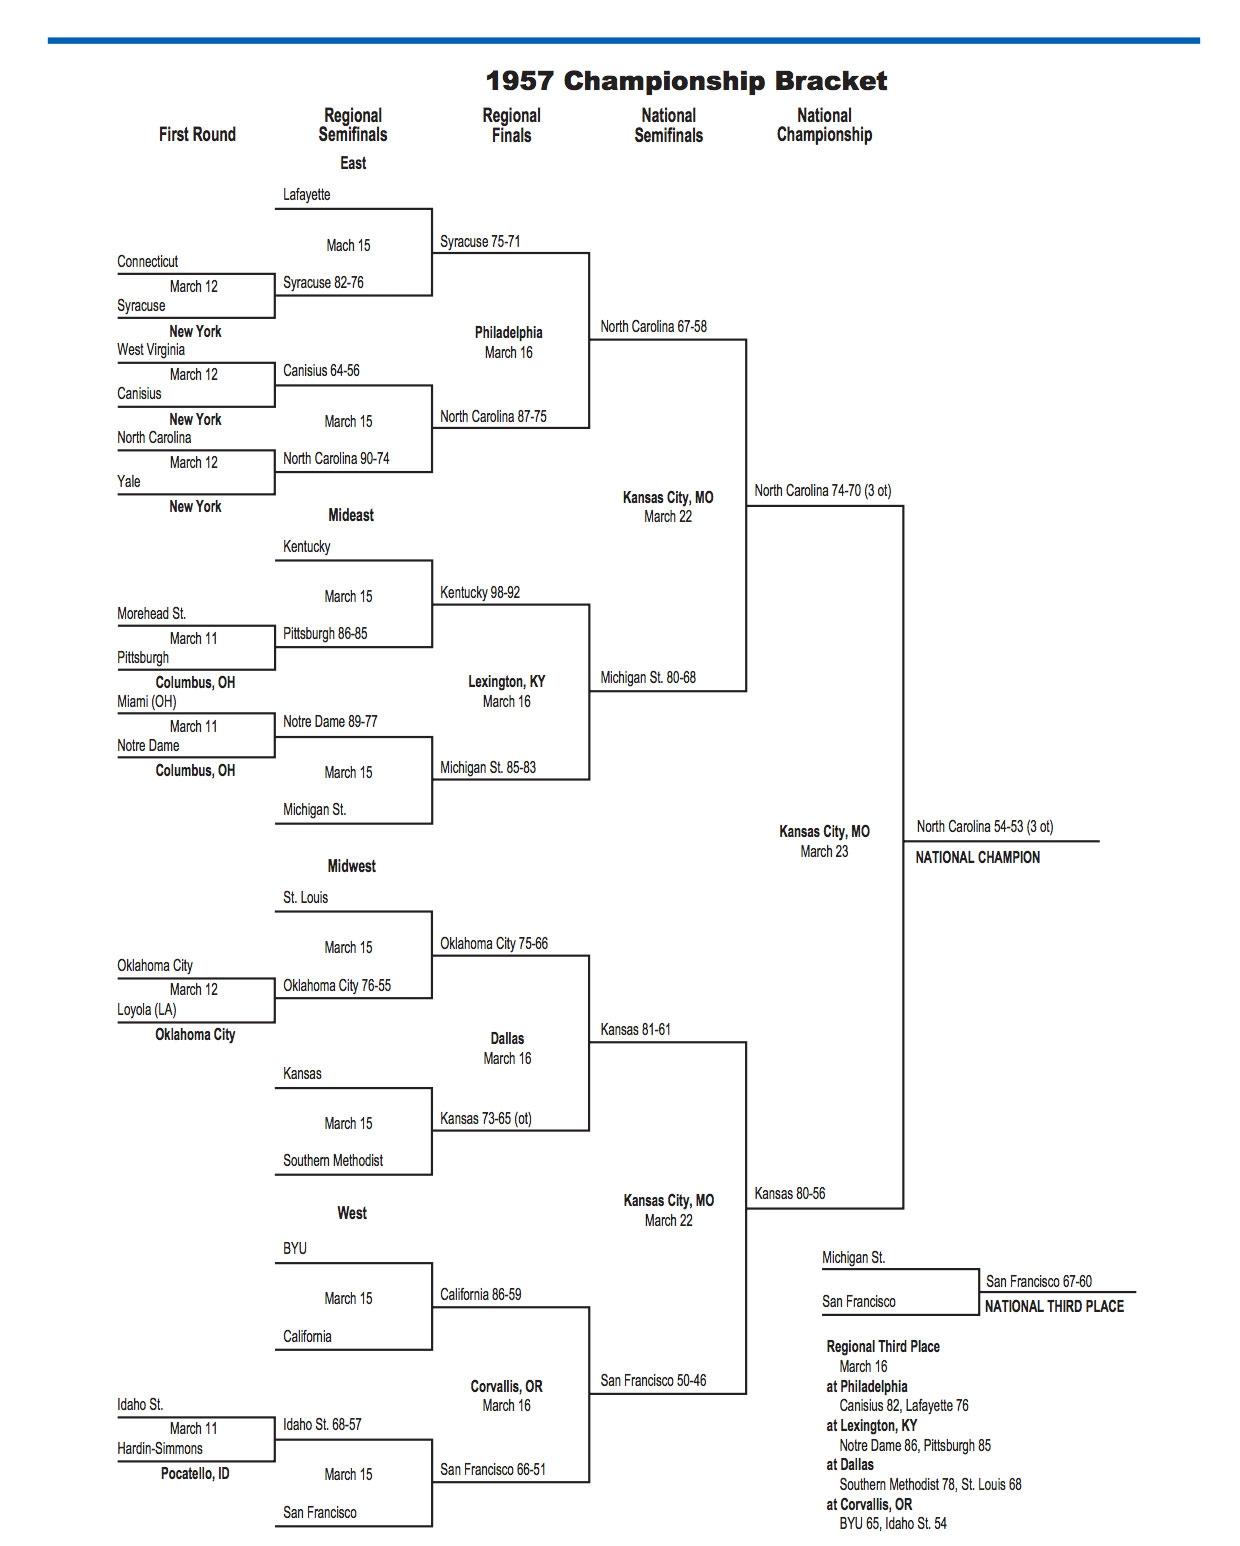 This is the 1957 NCAA tournament bracket